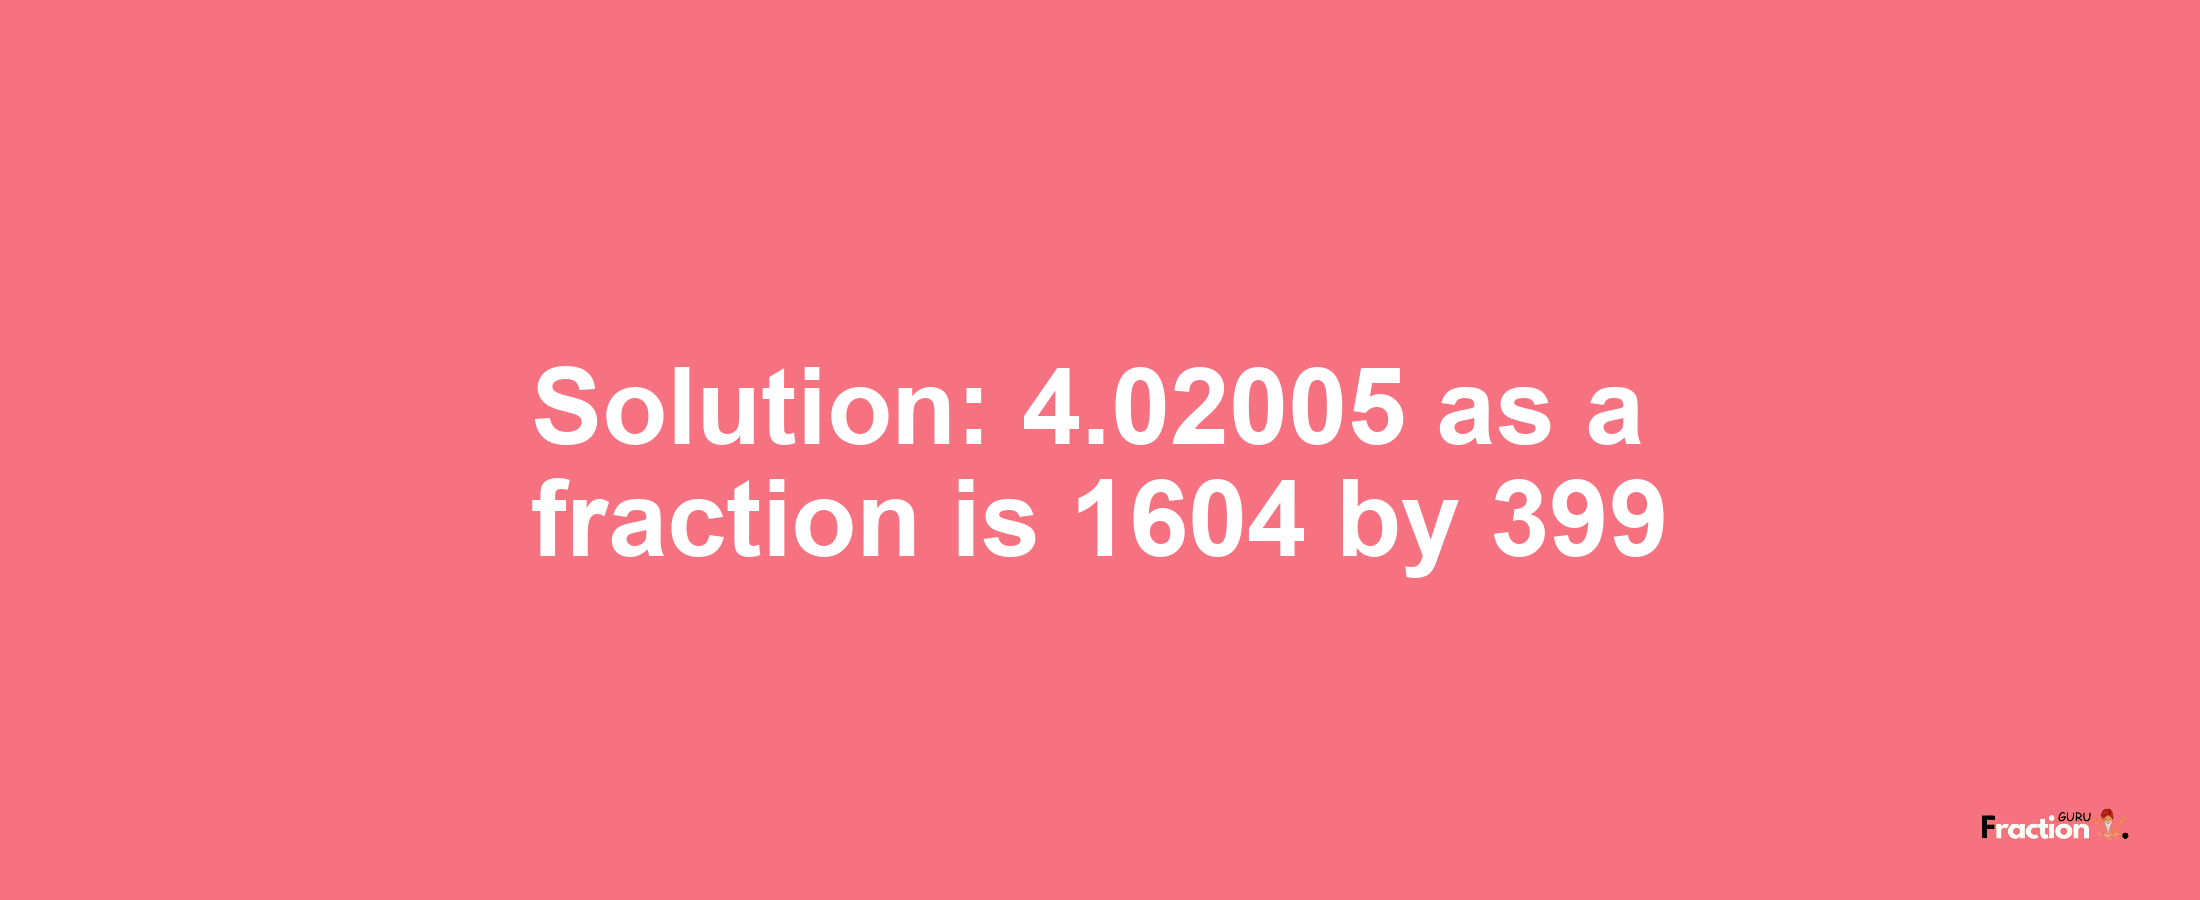 Solution:4.02005 as a fraction is 1604/399